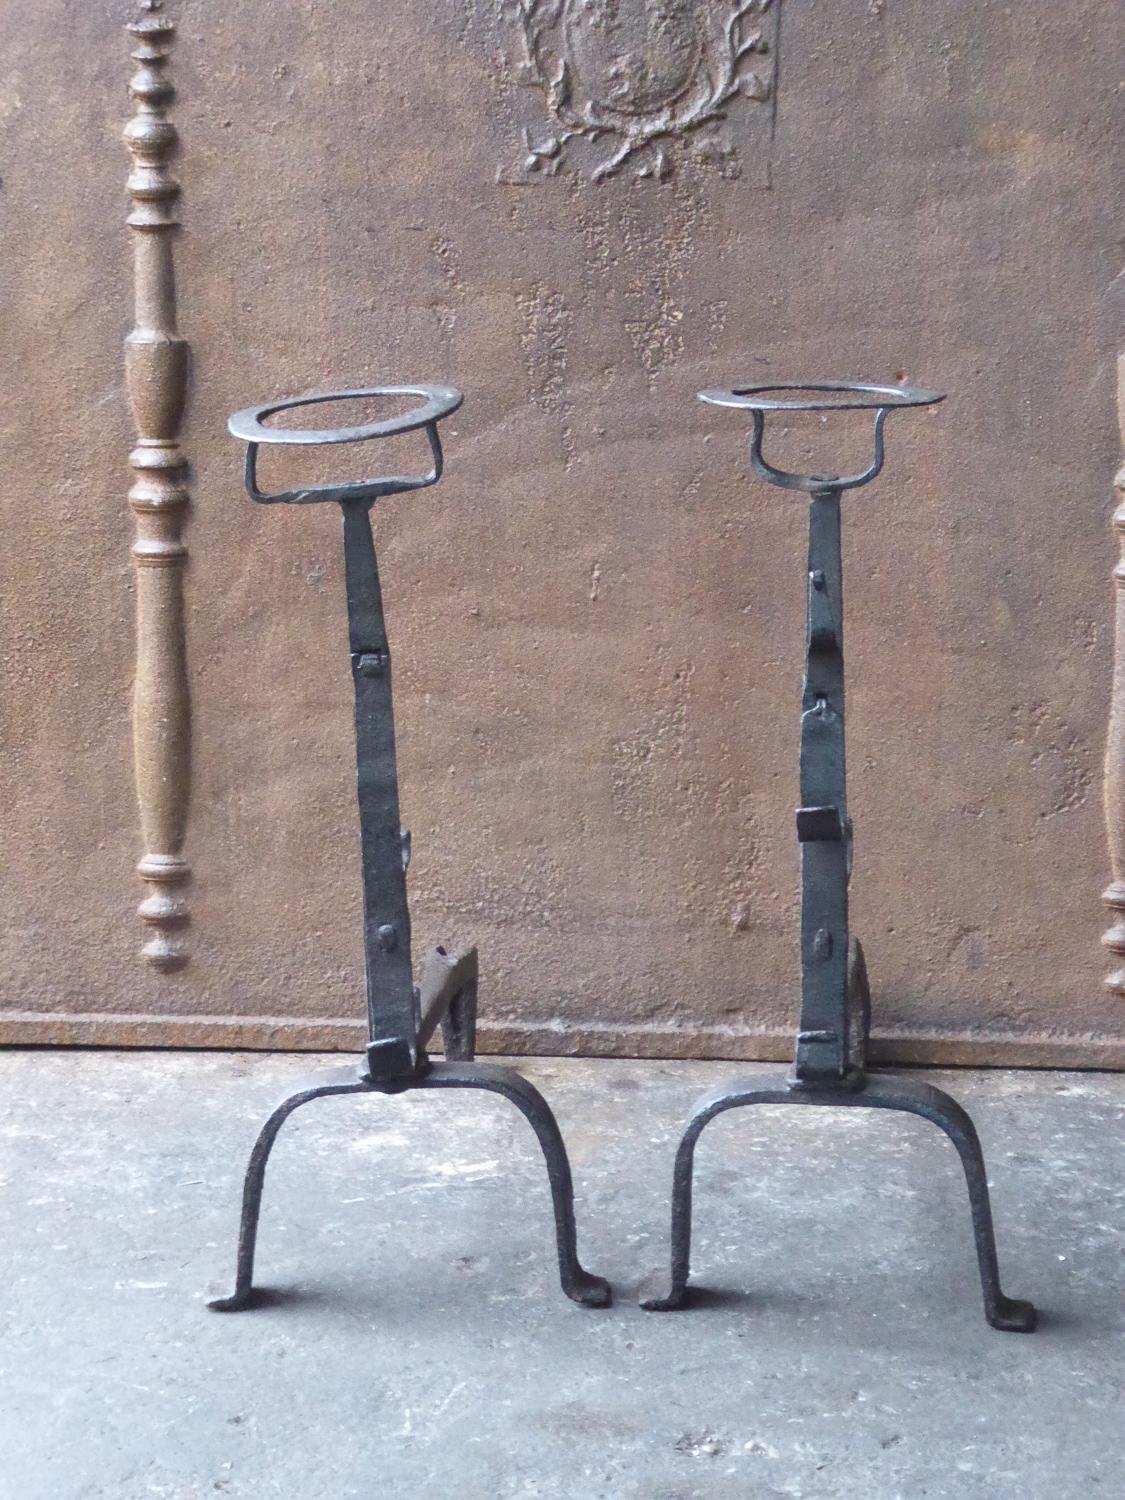 17th-18th century French andirons made of wrought iron. The style of the andirons is gothic. The andirons have spit hooks to grill food. They have a natural brown patina. The condition is good.